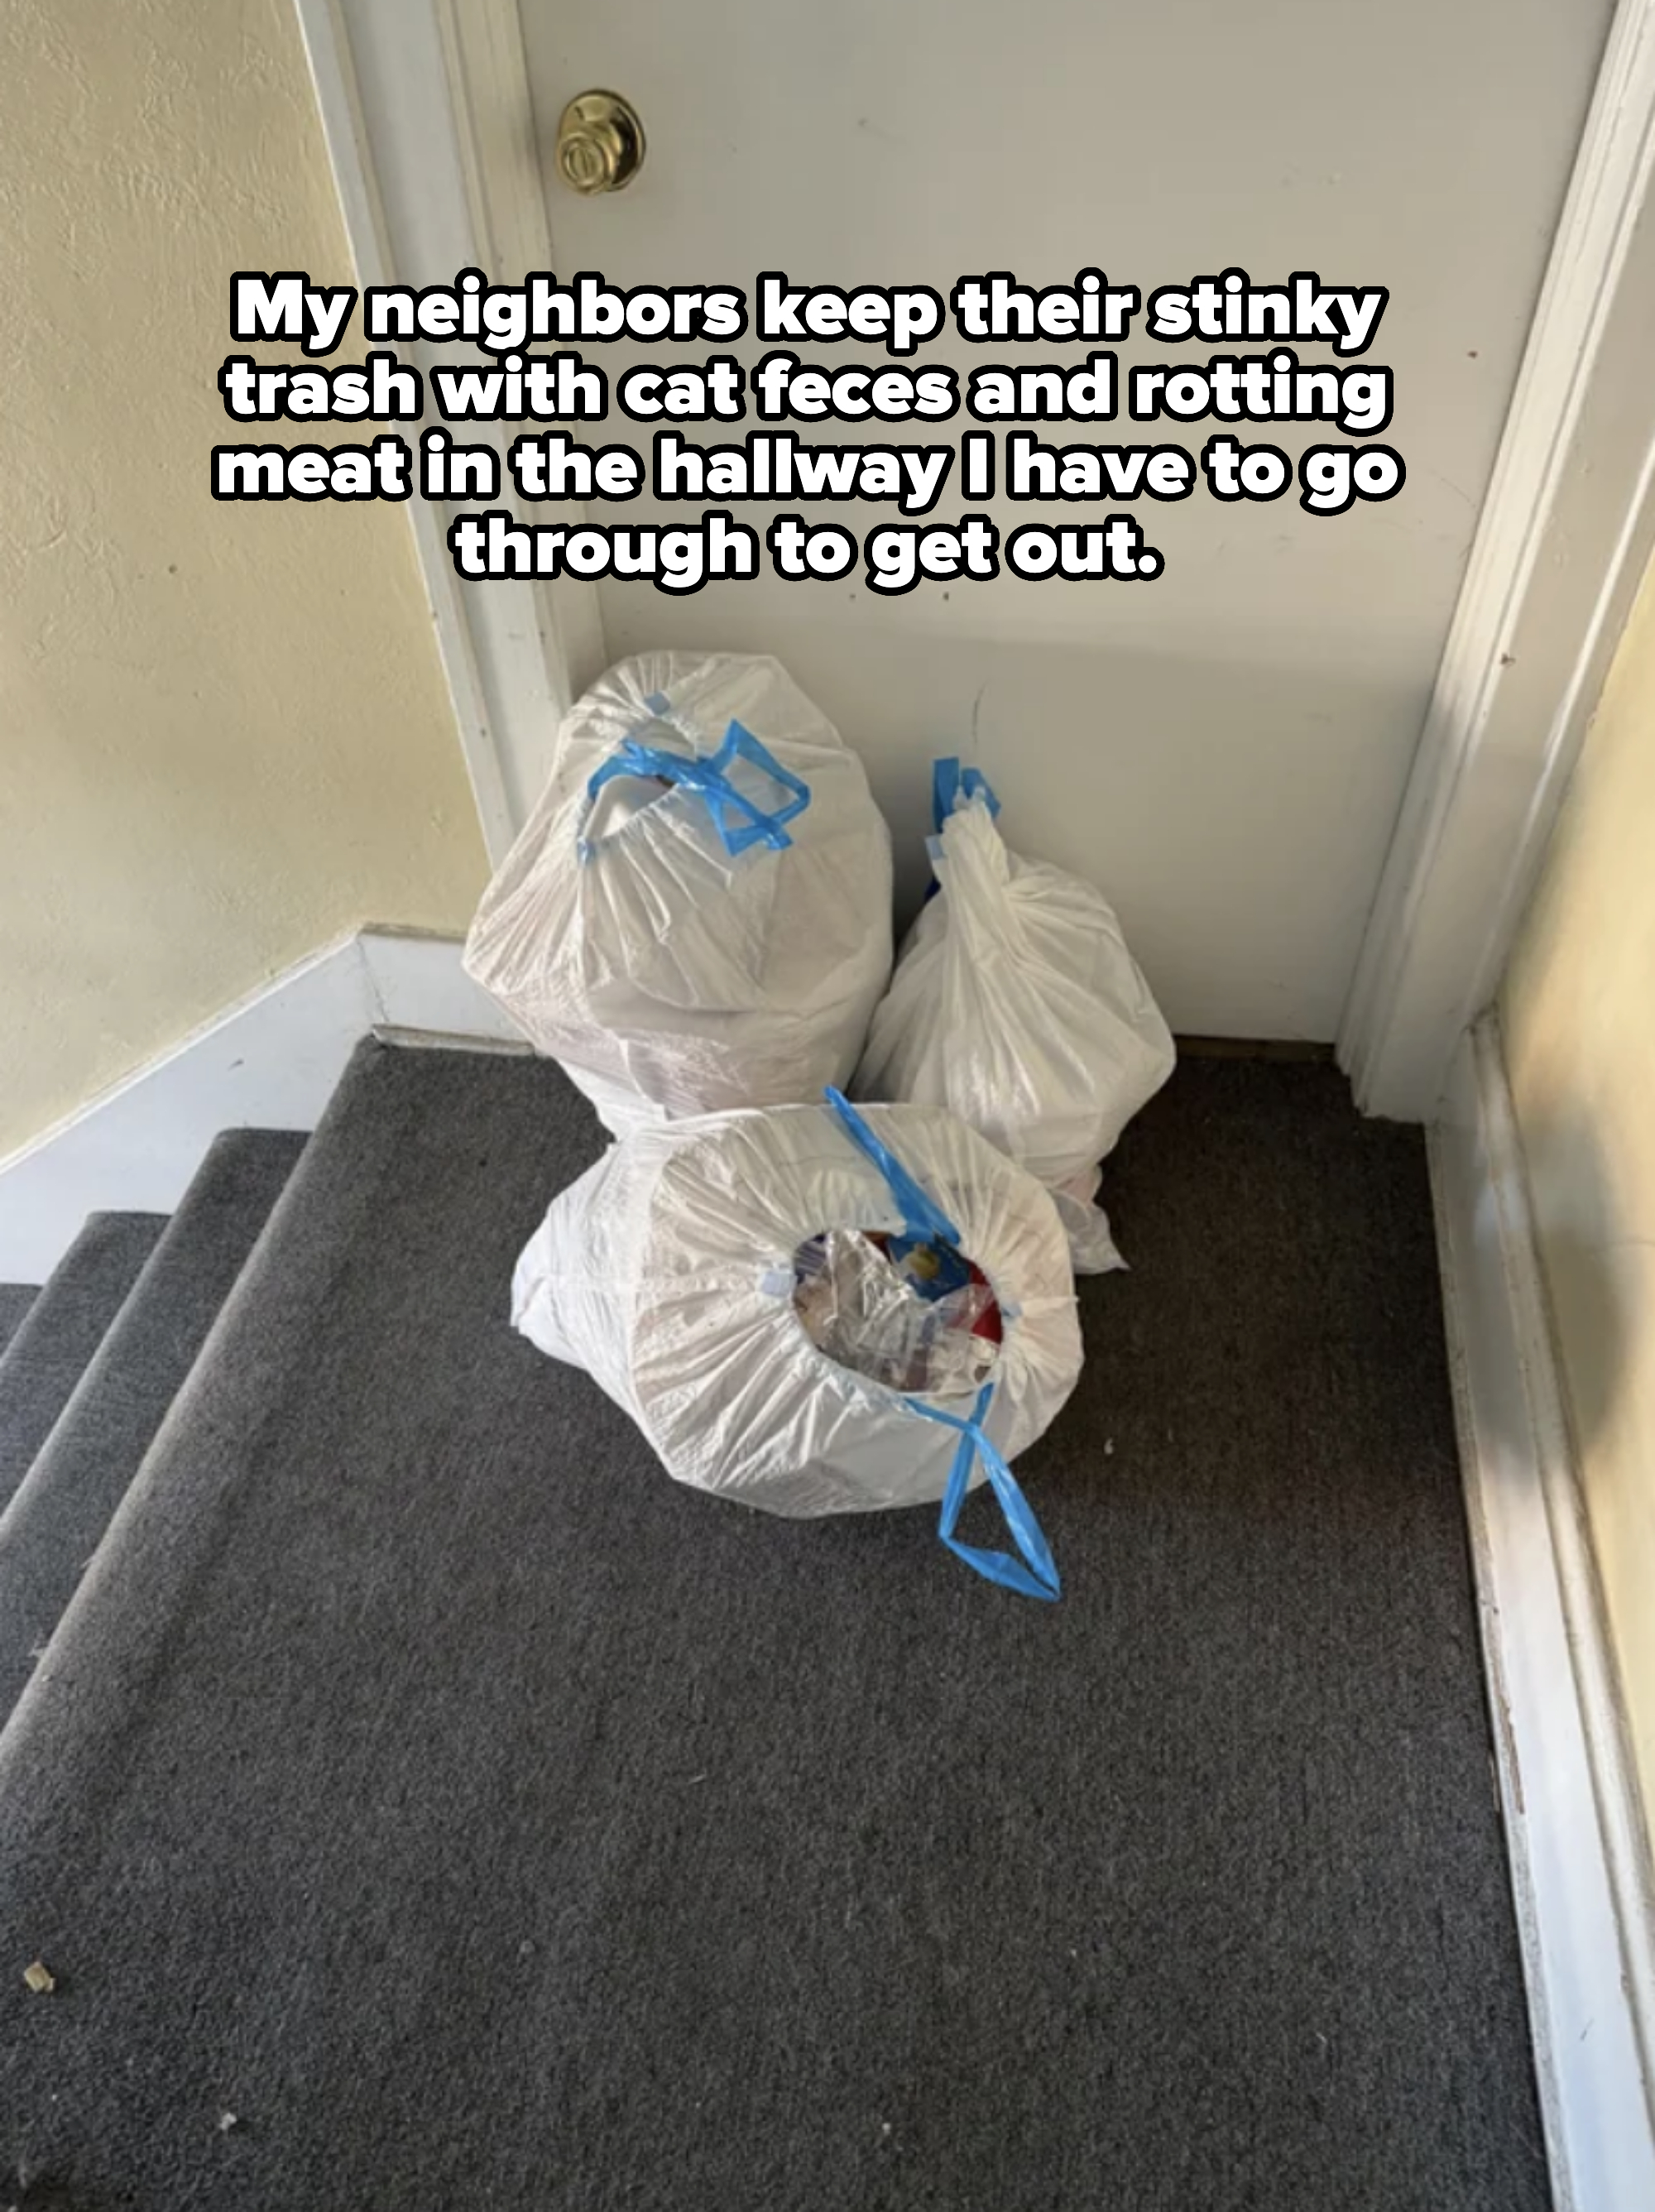 bags of garbage in a hallway